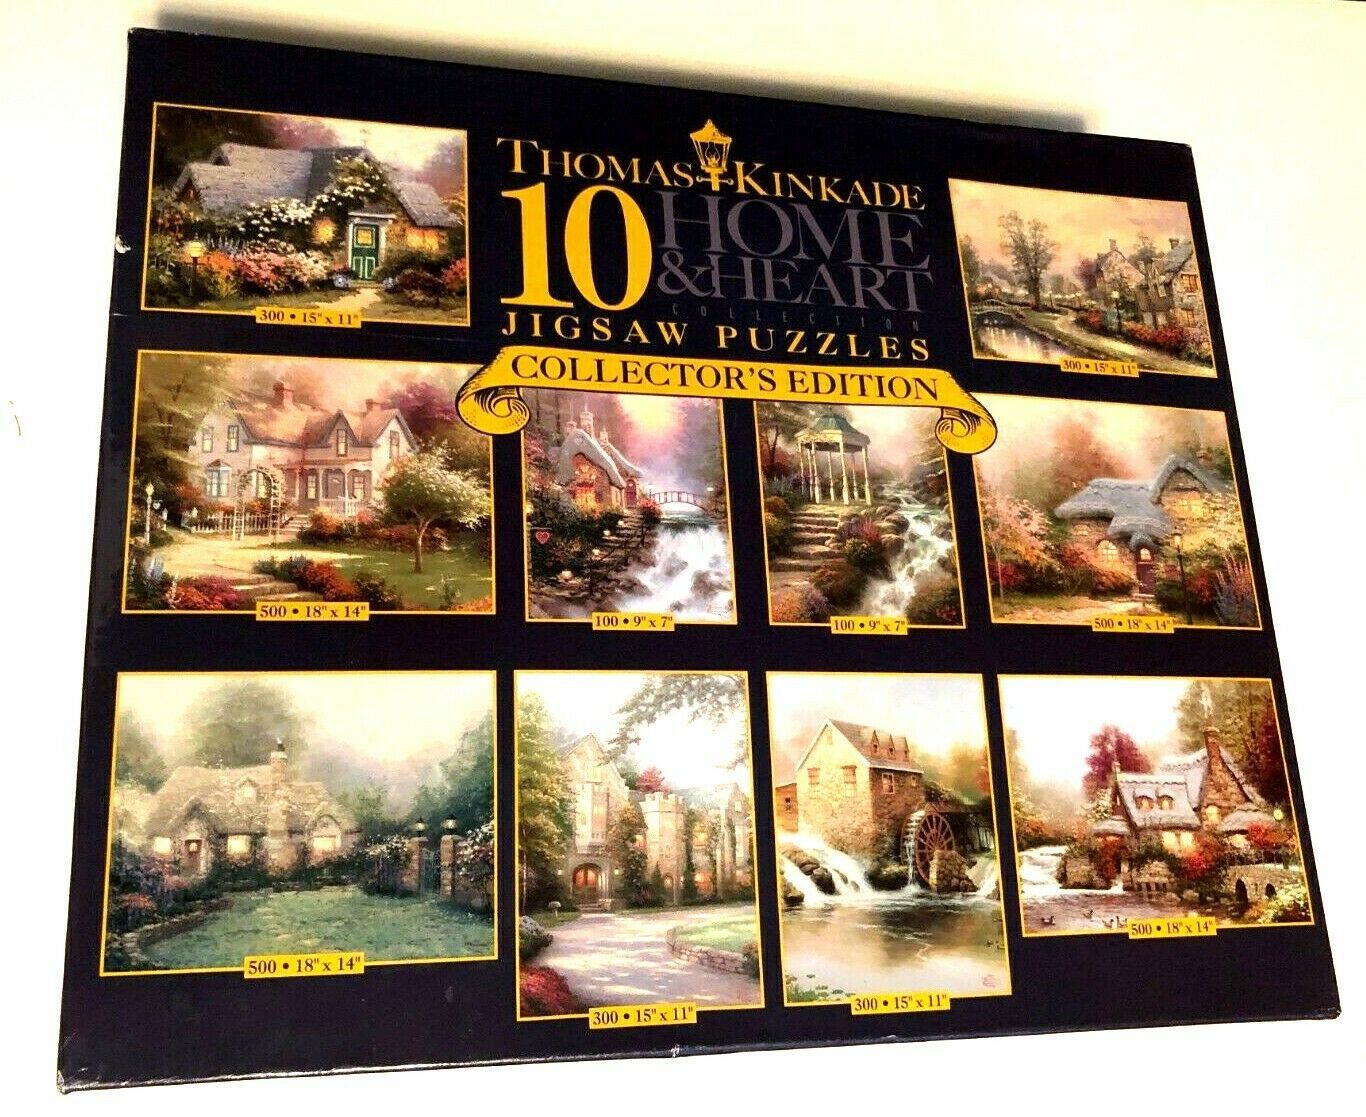 Primary image for Ceaco Thomas Kinkade 10 Home & Heart Jigsaw Puzzles Collectors Edition 2005 New